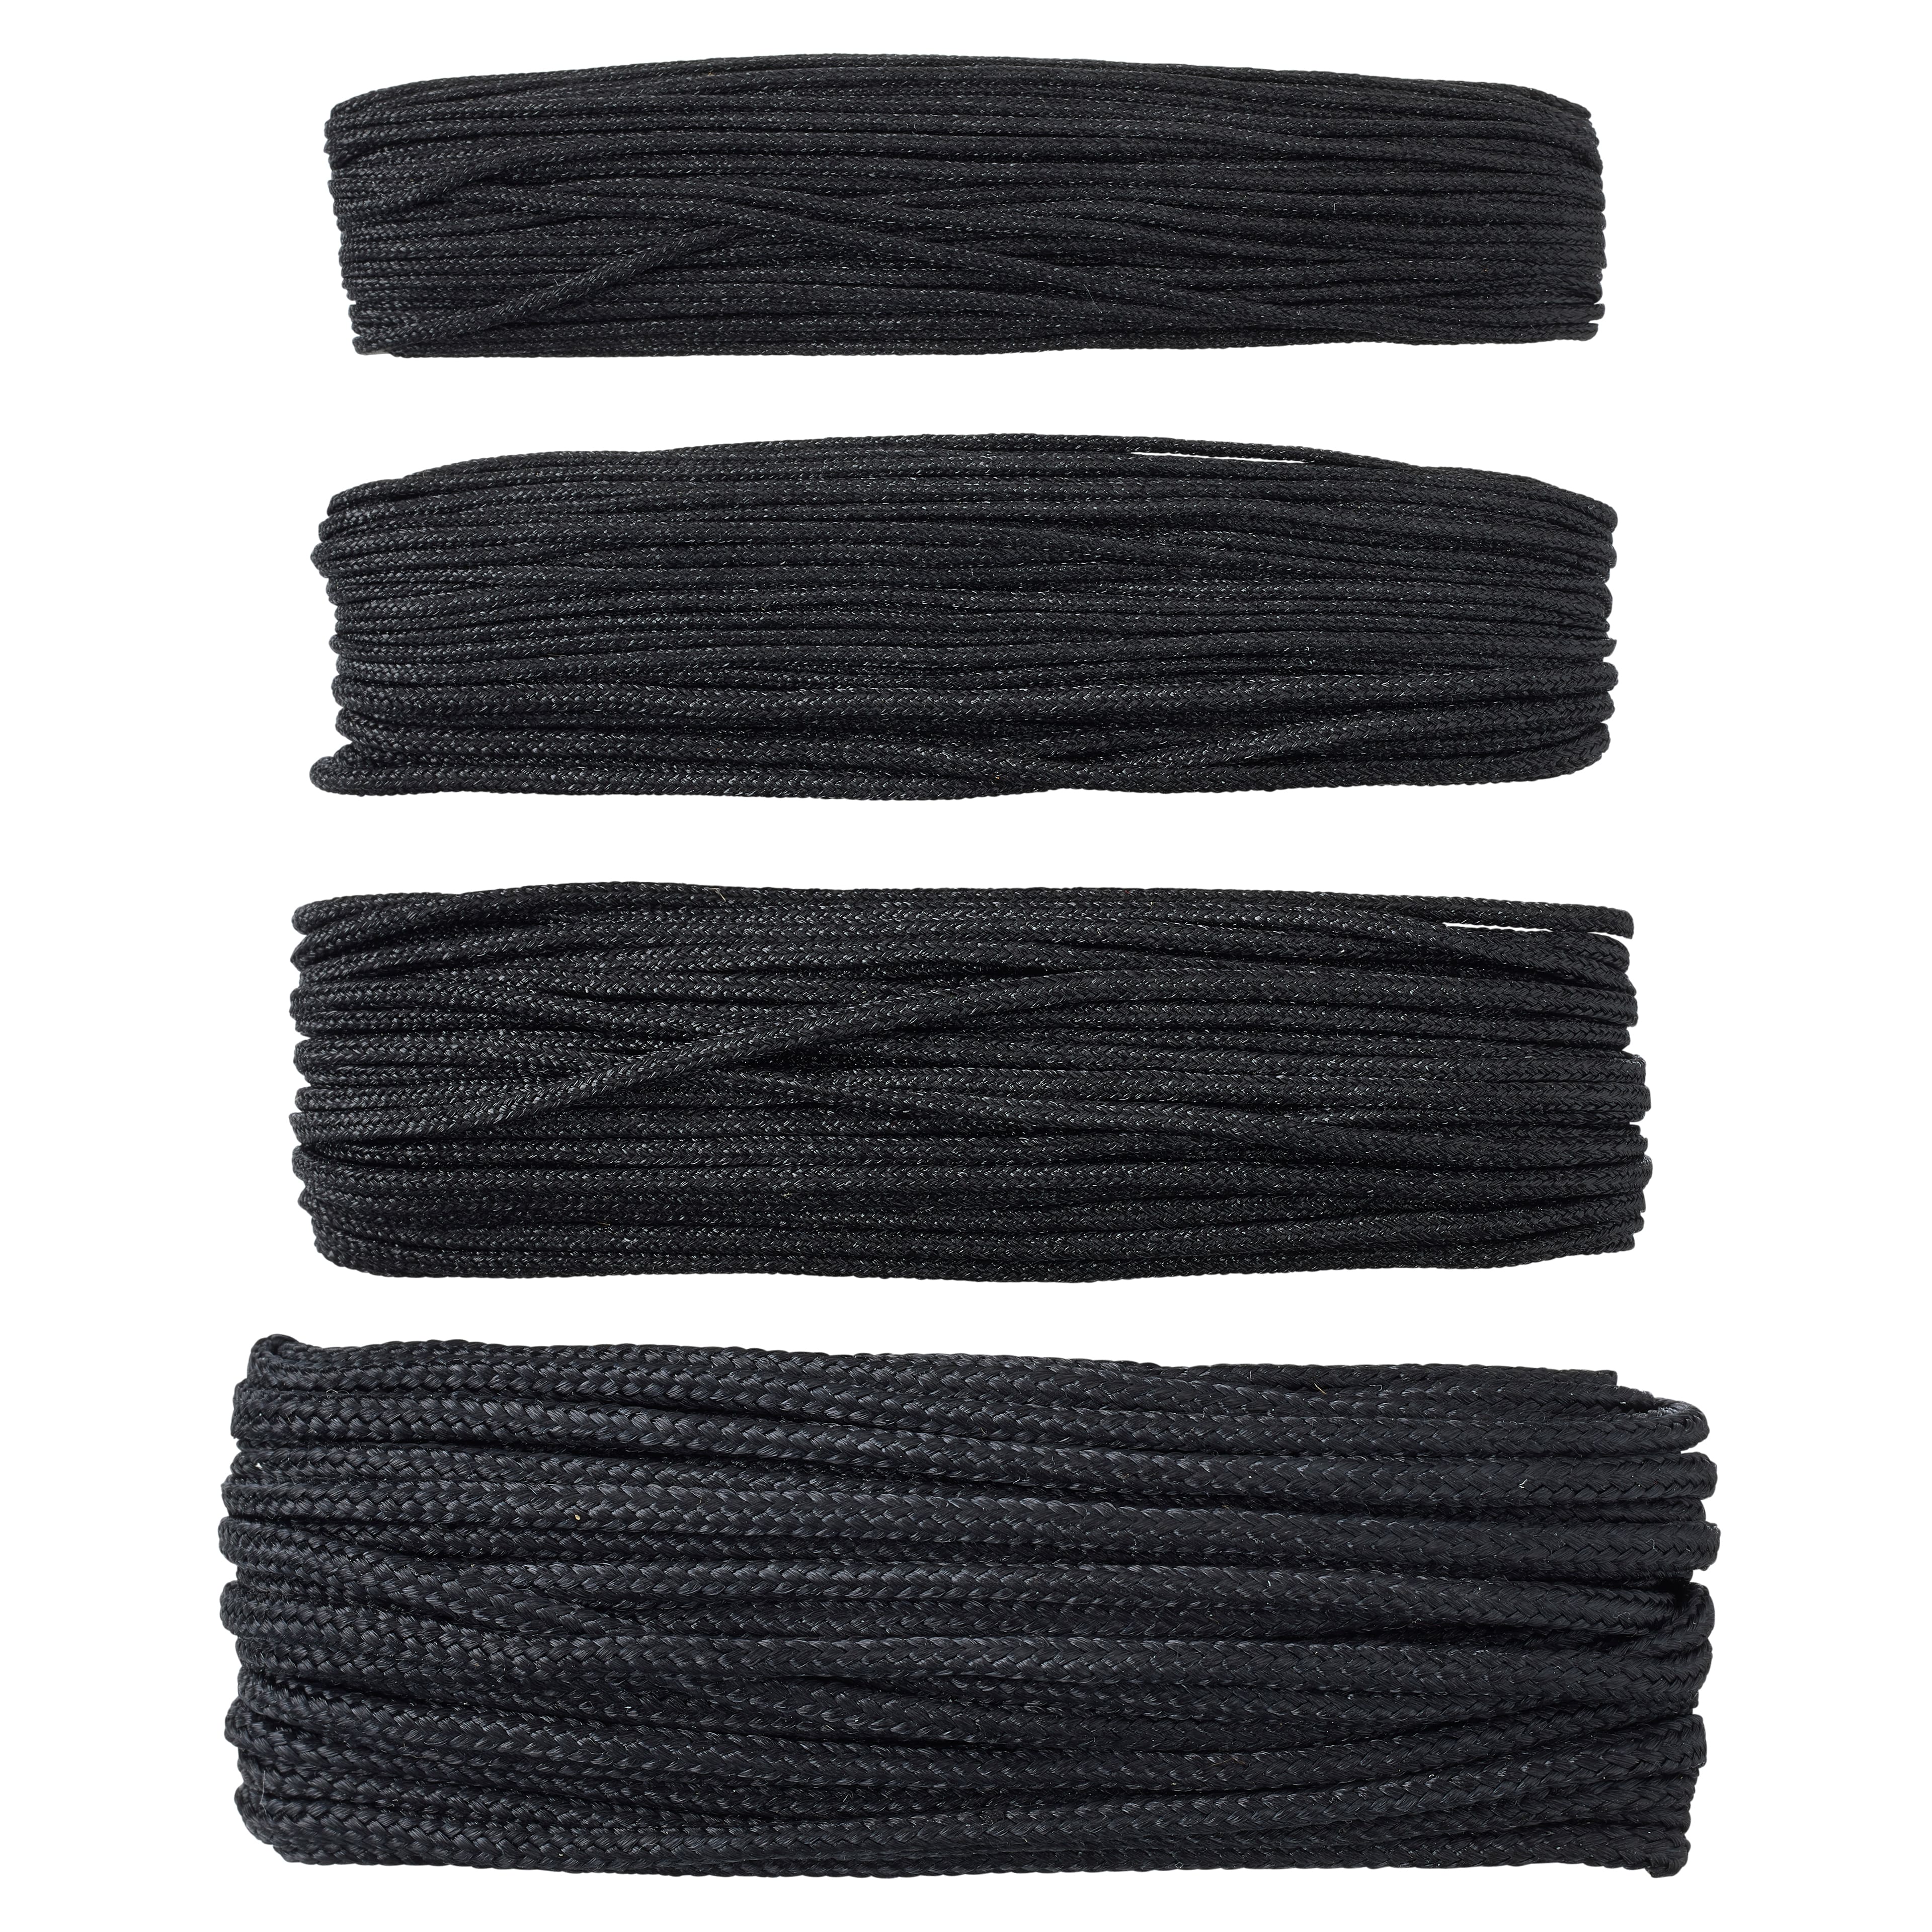 12 Pack: Coco & Black Waxed Cotton Cording by Bead Landing™